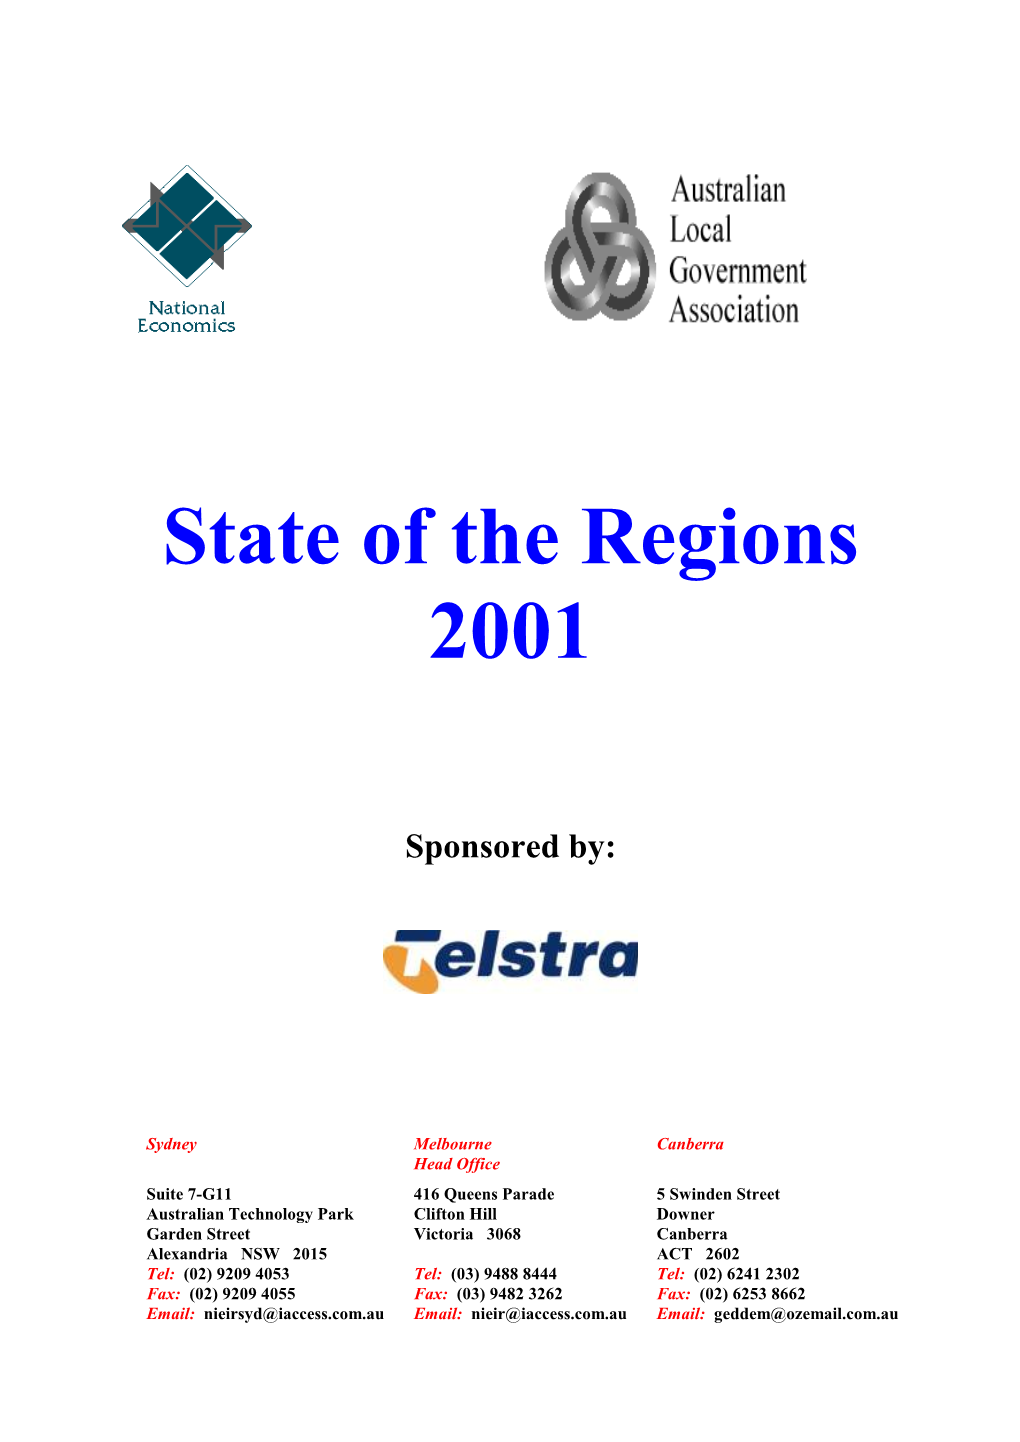 State of the Regions 2001